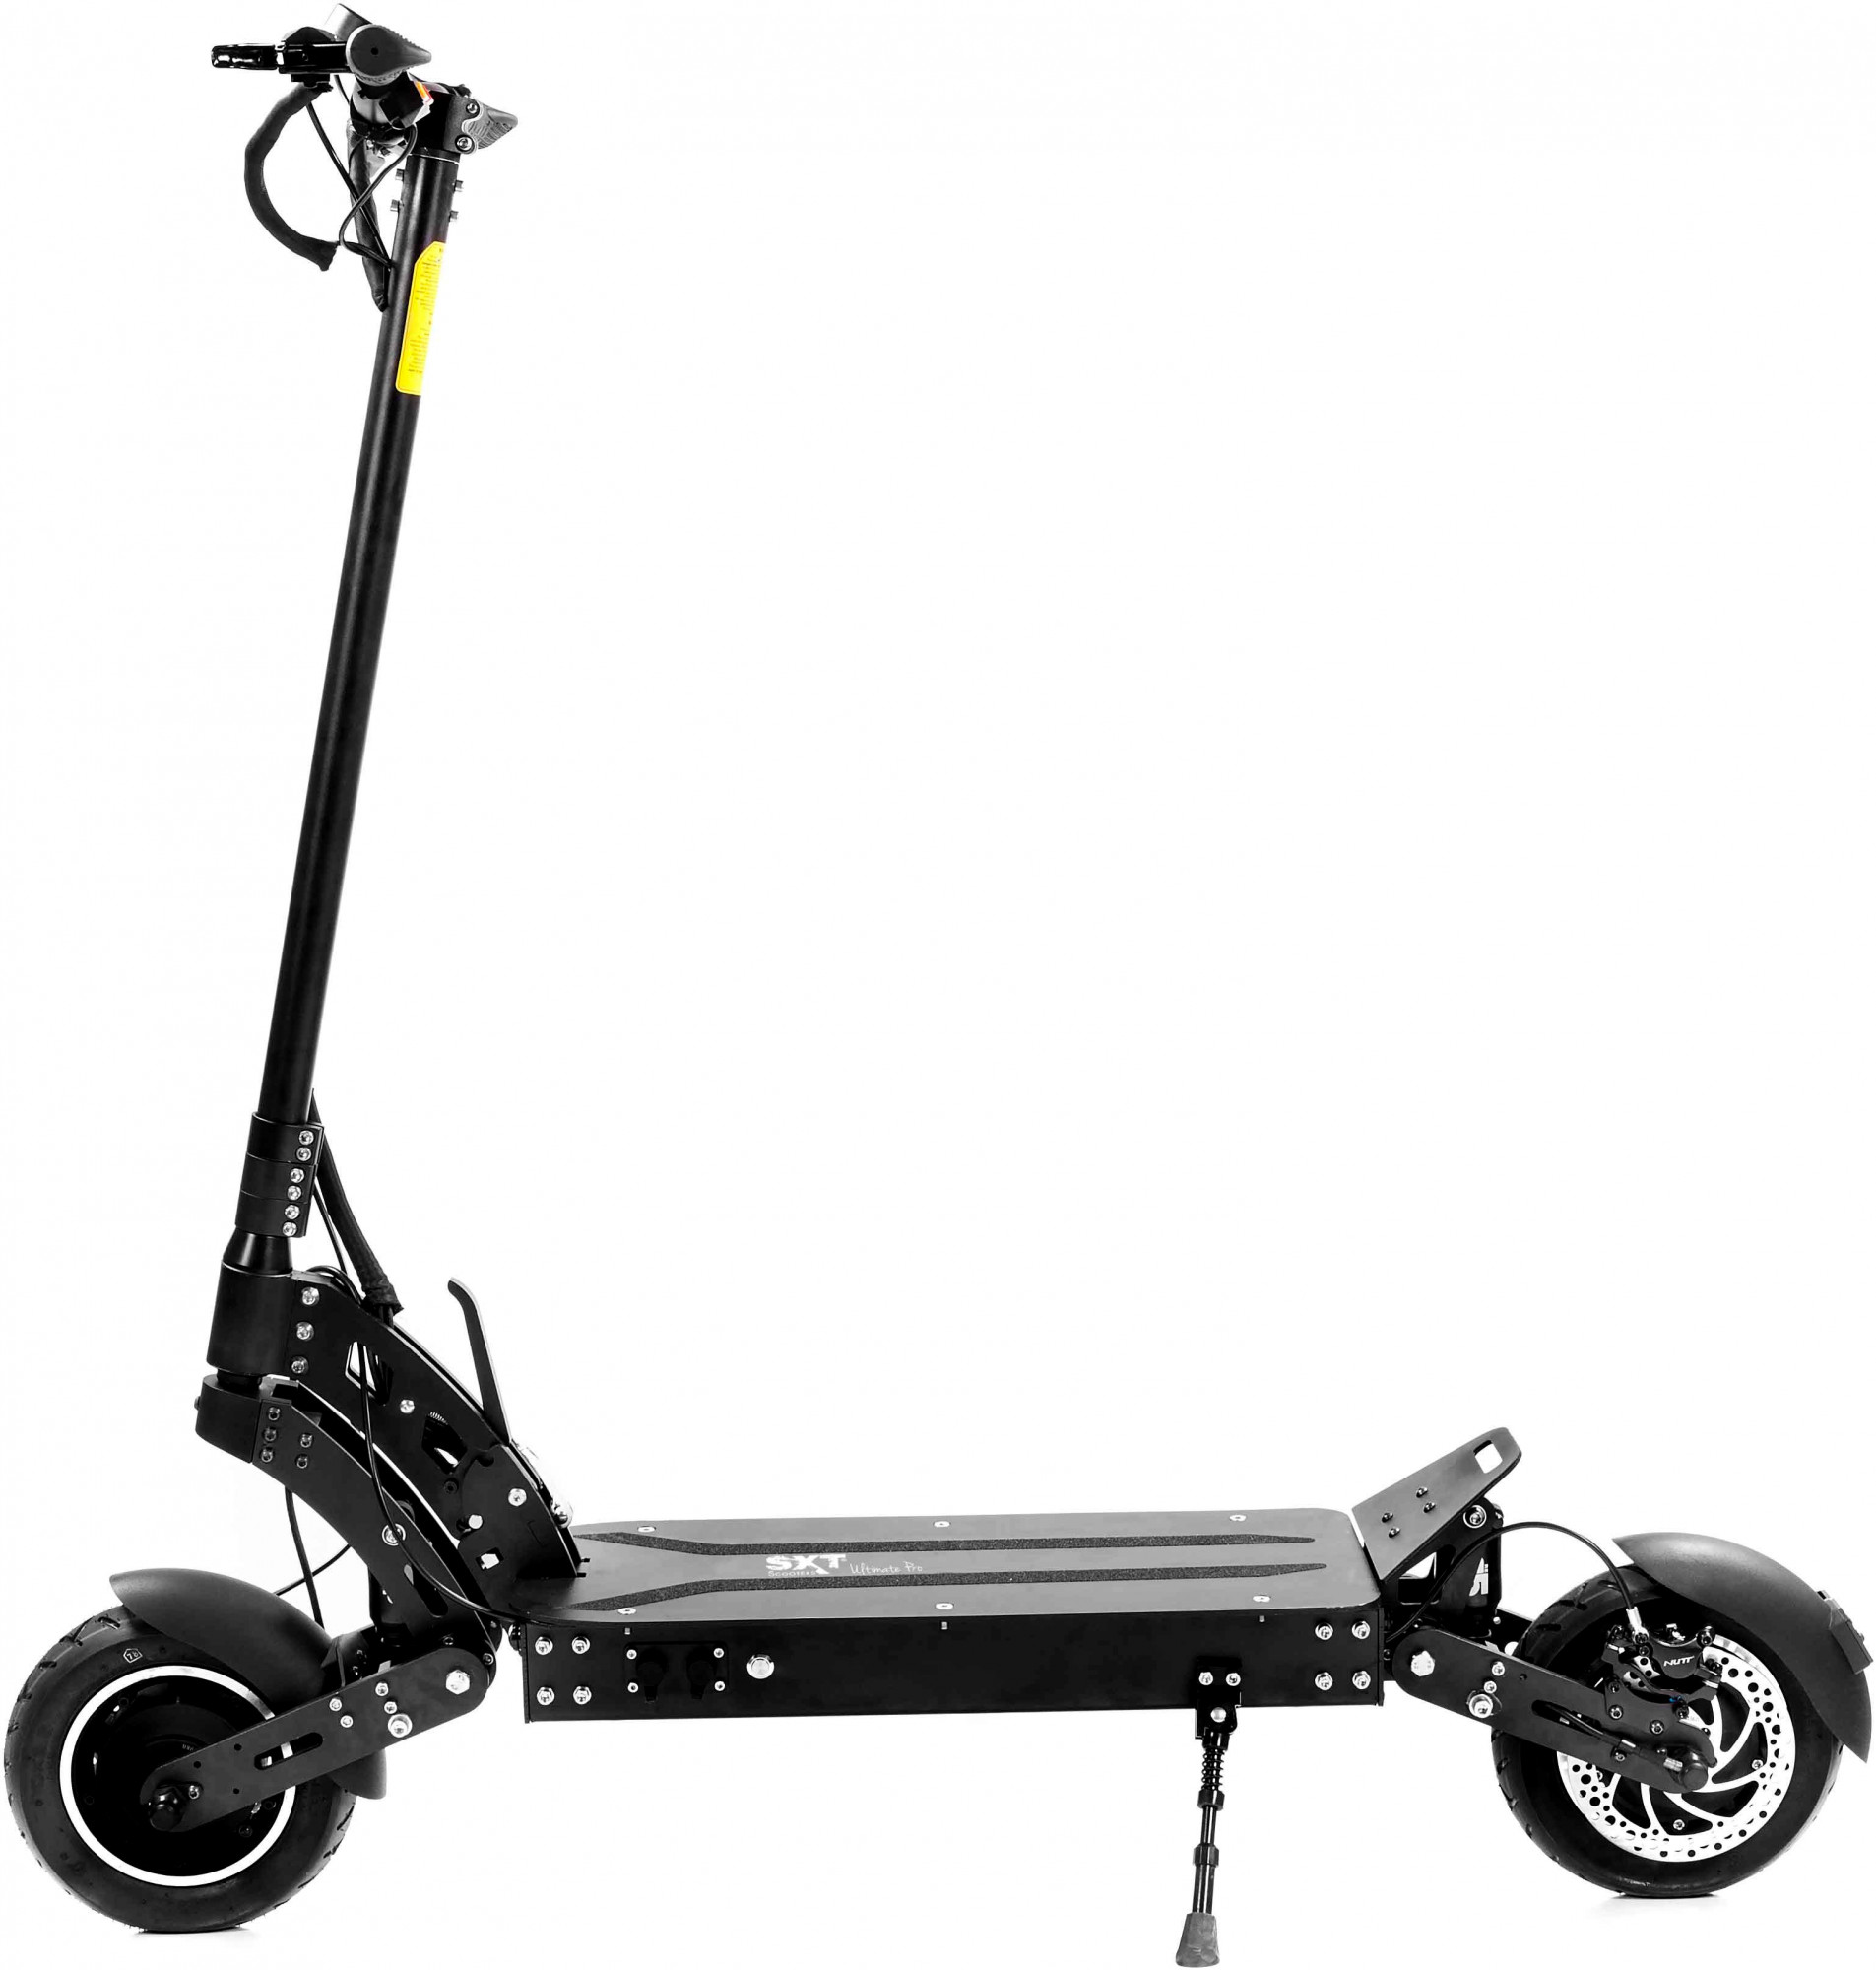 Enjoy the electric SXT - in stock PRO ride Ultimate scooter